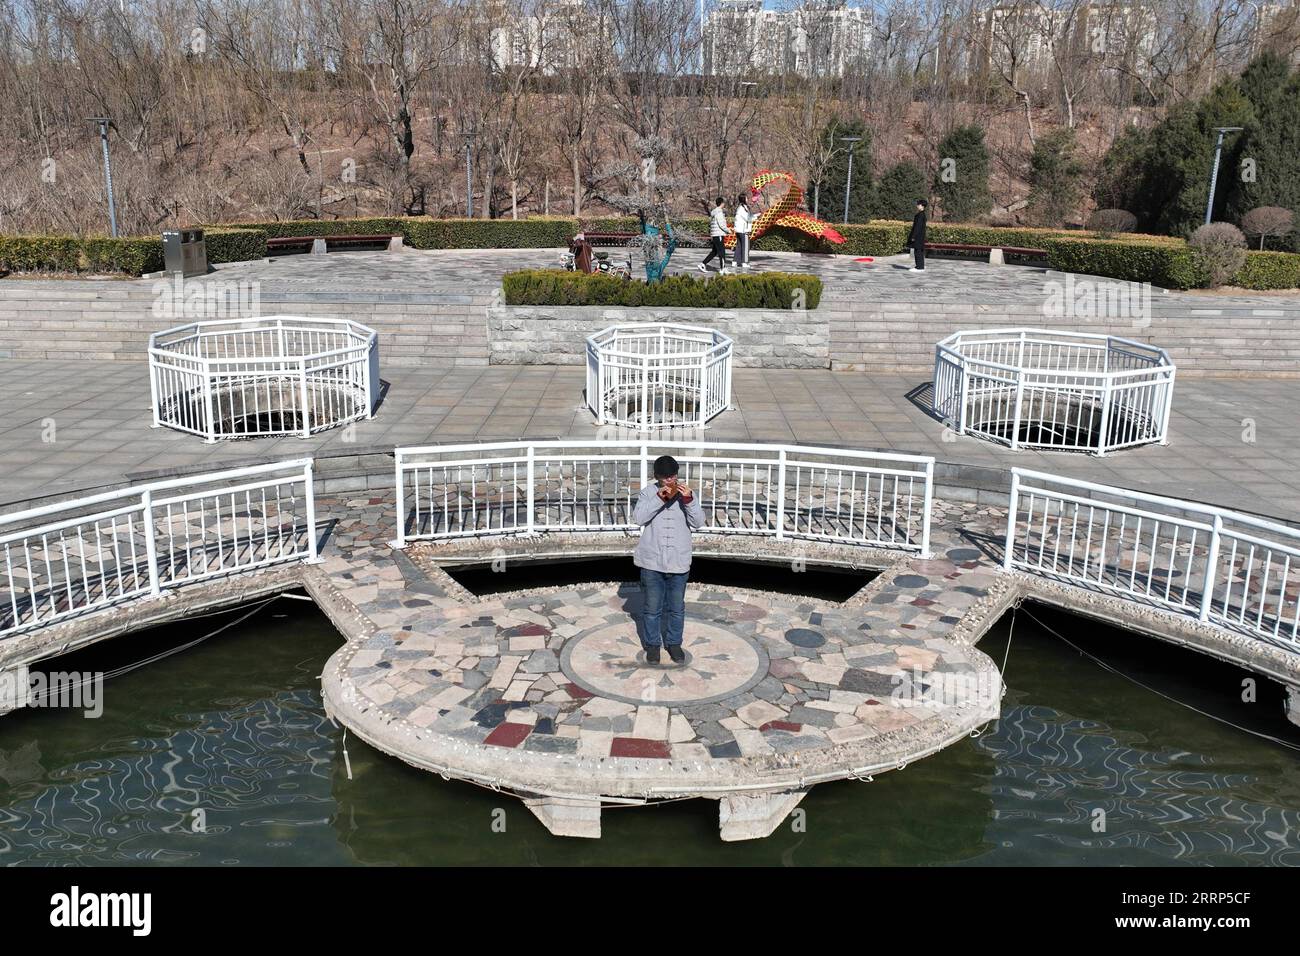 230221 -- XINGTAI, Feb. 21, 2023 -- This aerial photo shows Hou Yimin playing the ocarina in a park in Xingtai, north China s Hebei Province, Feb. 20, 2023. Ocarina is a small sized, flute-like musical instrument, which has gained popularity around the world in recent years. Hou Yimin, a craftsman from Xingtai, Hebei Province, has been working on the research and production of wooden ocarinas since 2003. So far, Hou has made about 5,000 wooden ocarinas of over a hundred different types, selling to many countries including the United States, Japan, and South Korea. Some of his ocarinas are of t Stock Photo